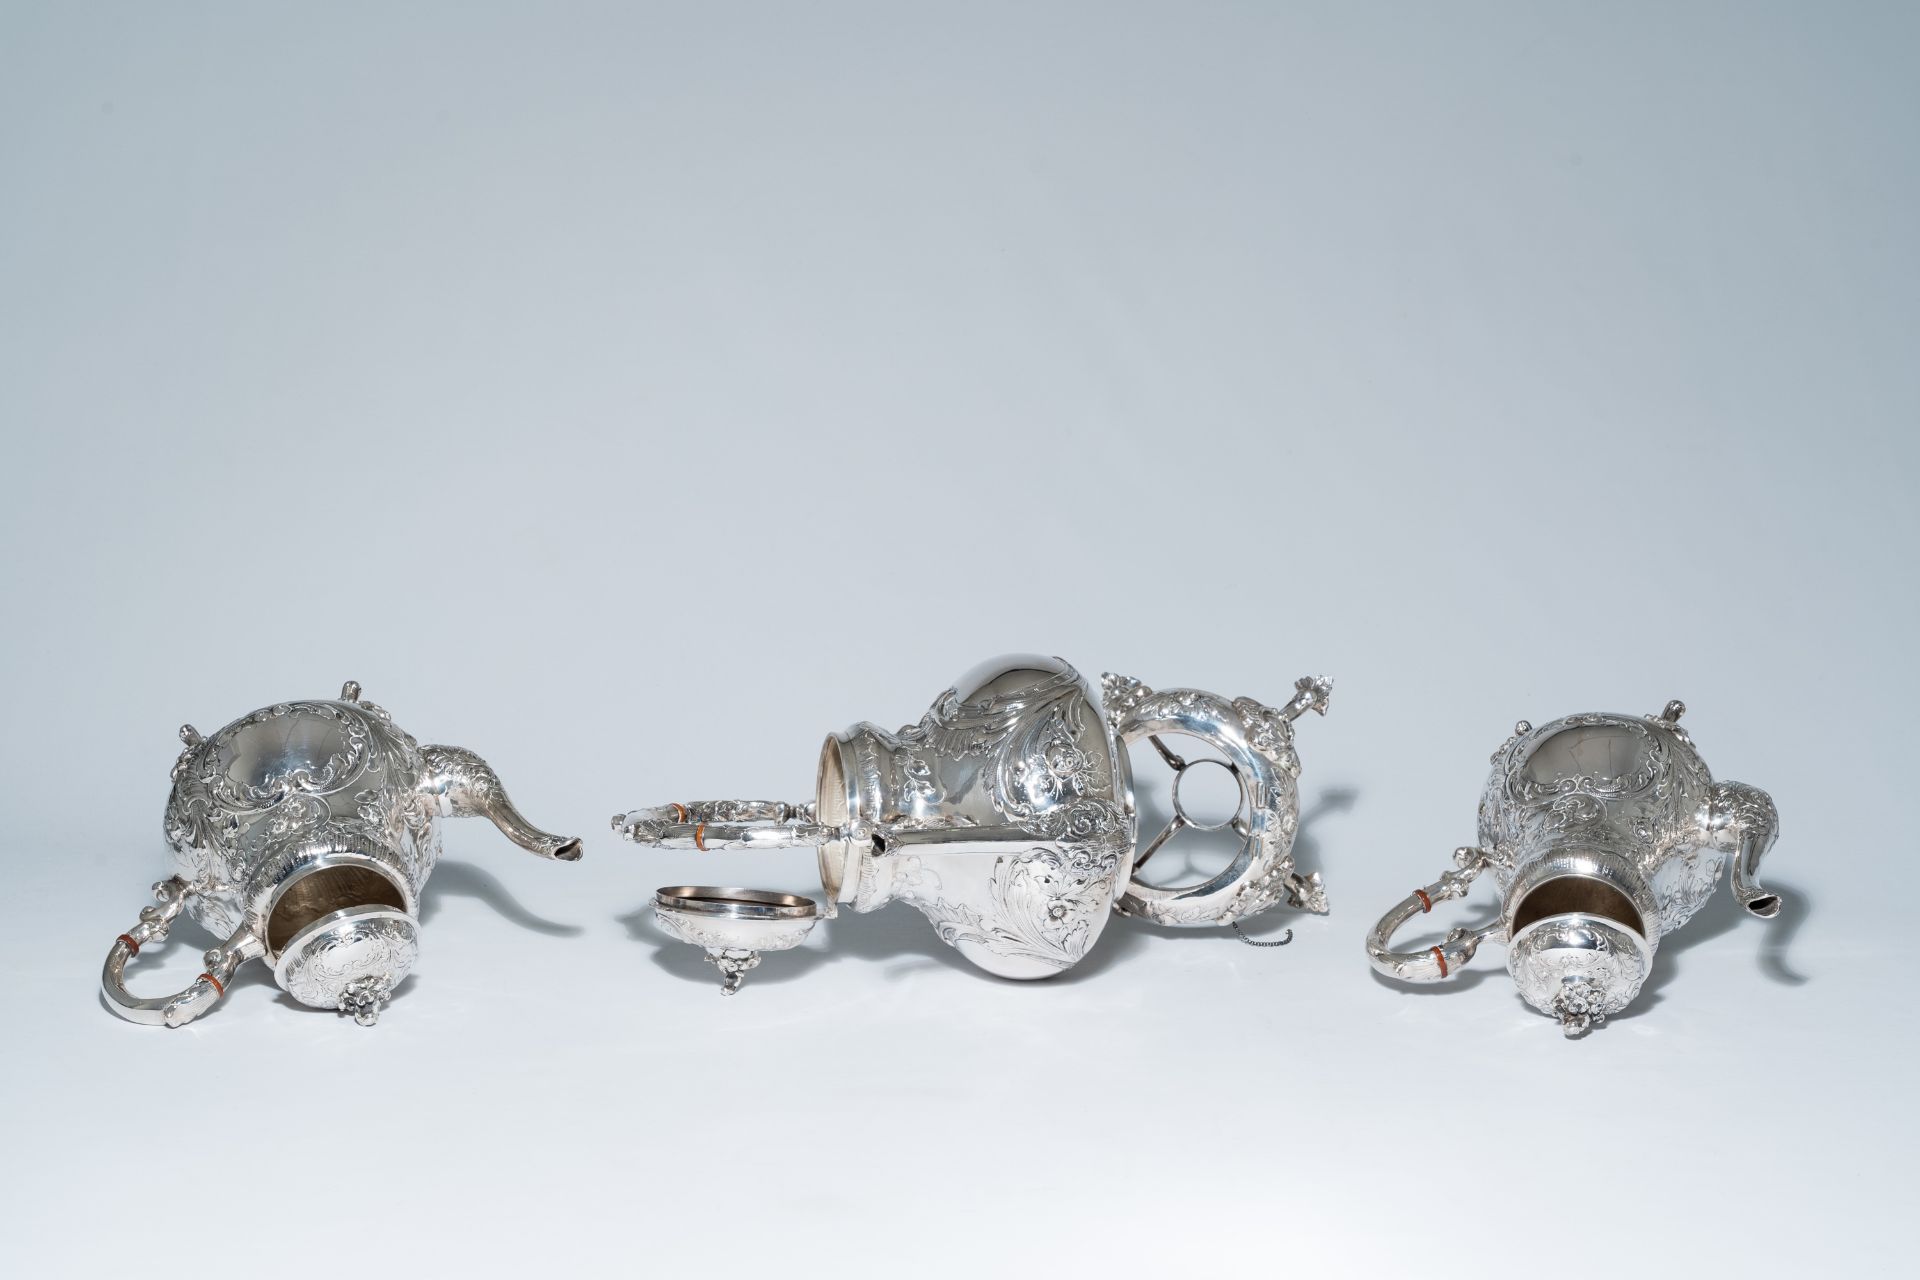 A five-piece German Rococo revival silver coffee and tea set with floral relief design, 800/000, mak - Image 6 of 20